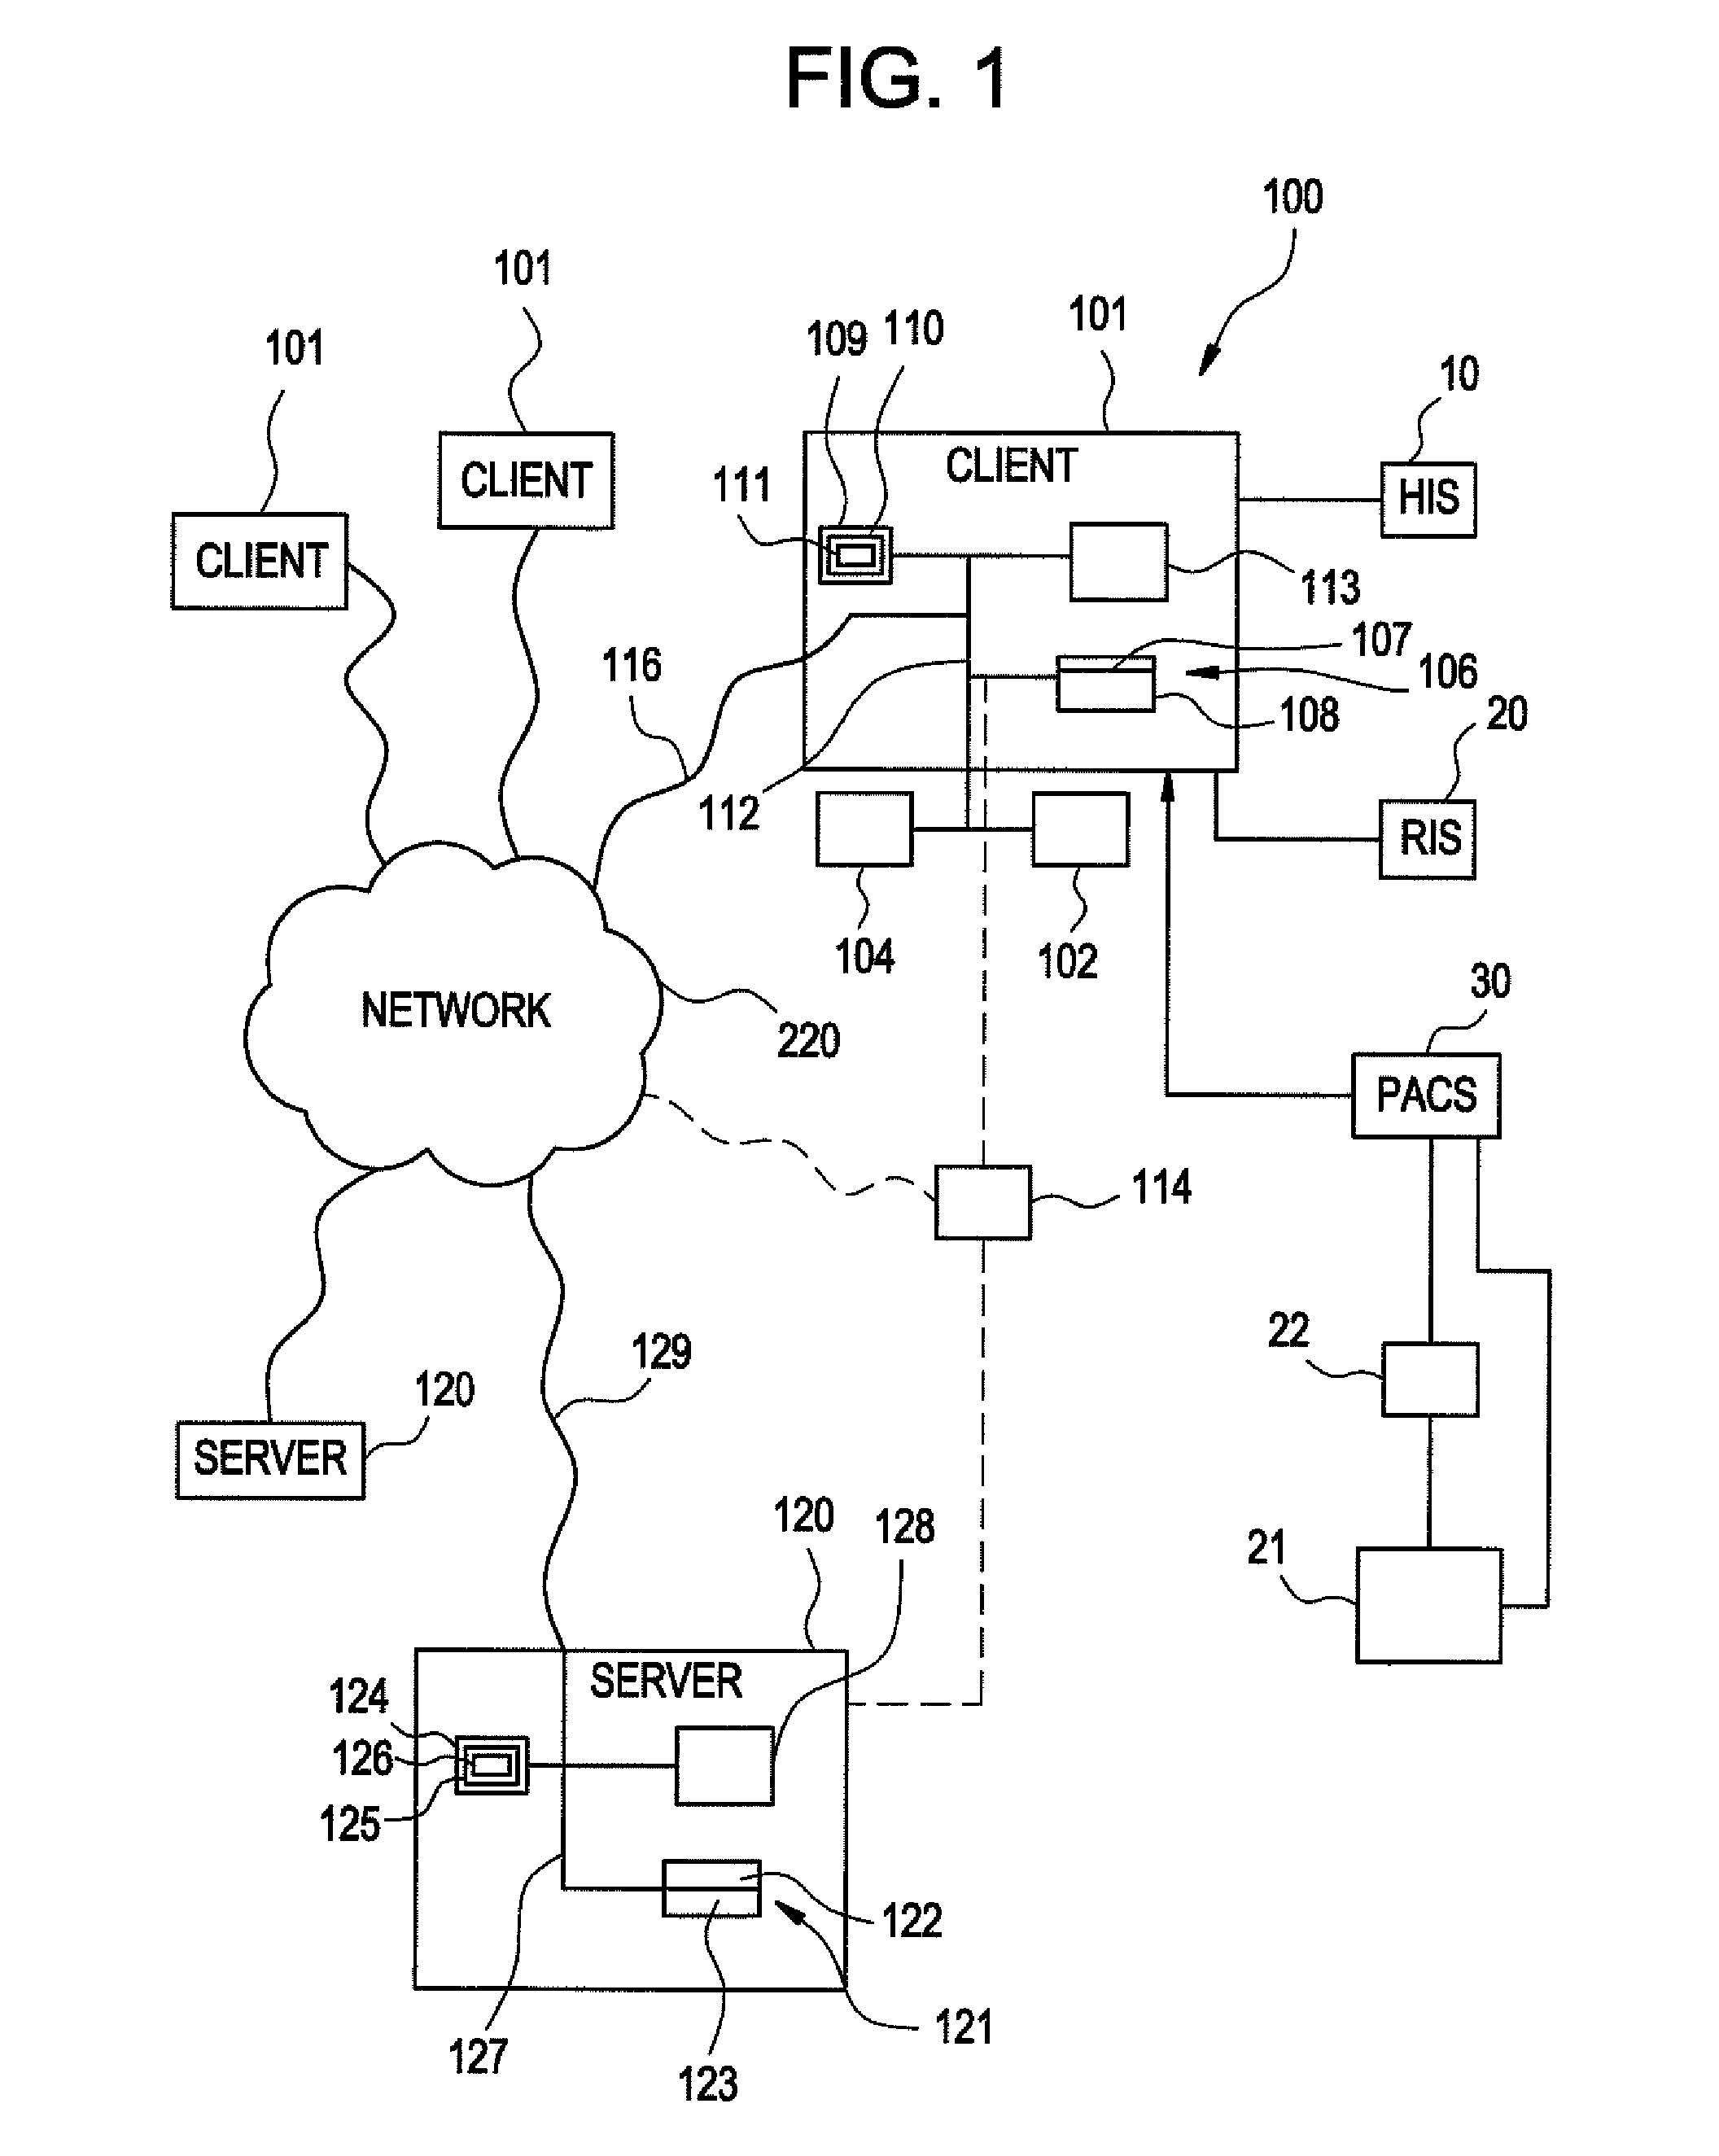 Method and apparatus for data recording, tracking, and analysis in critical results medical communication